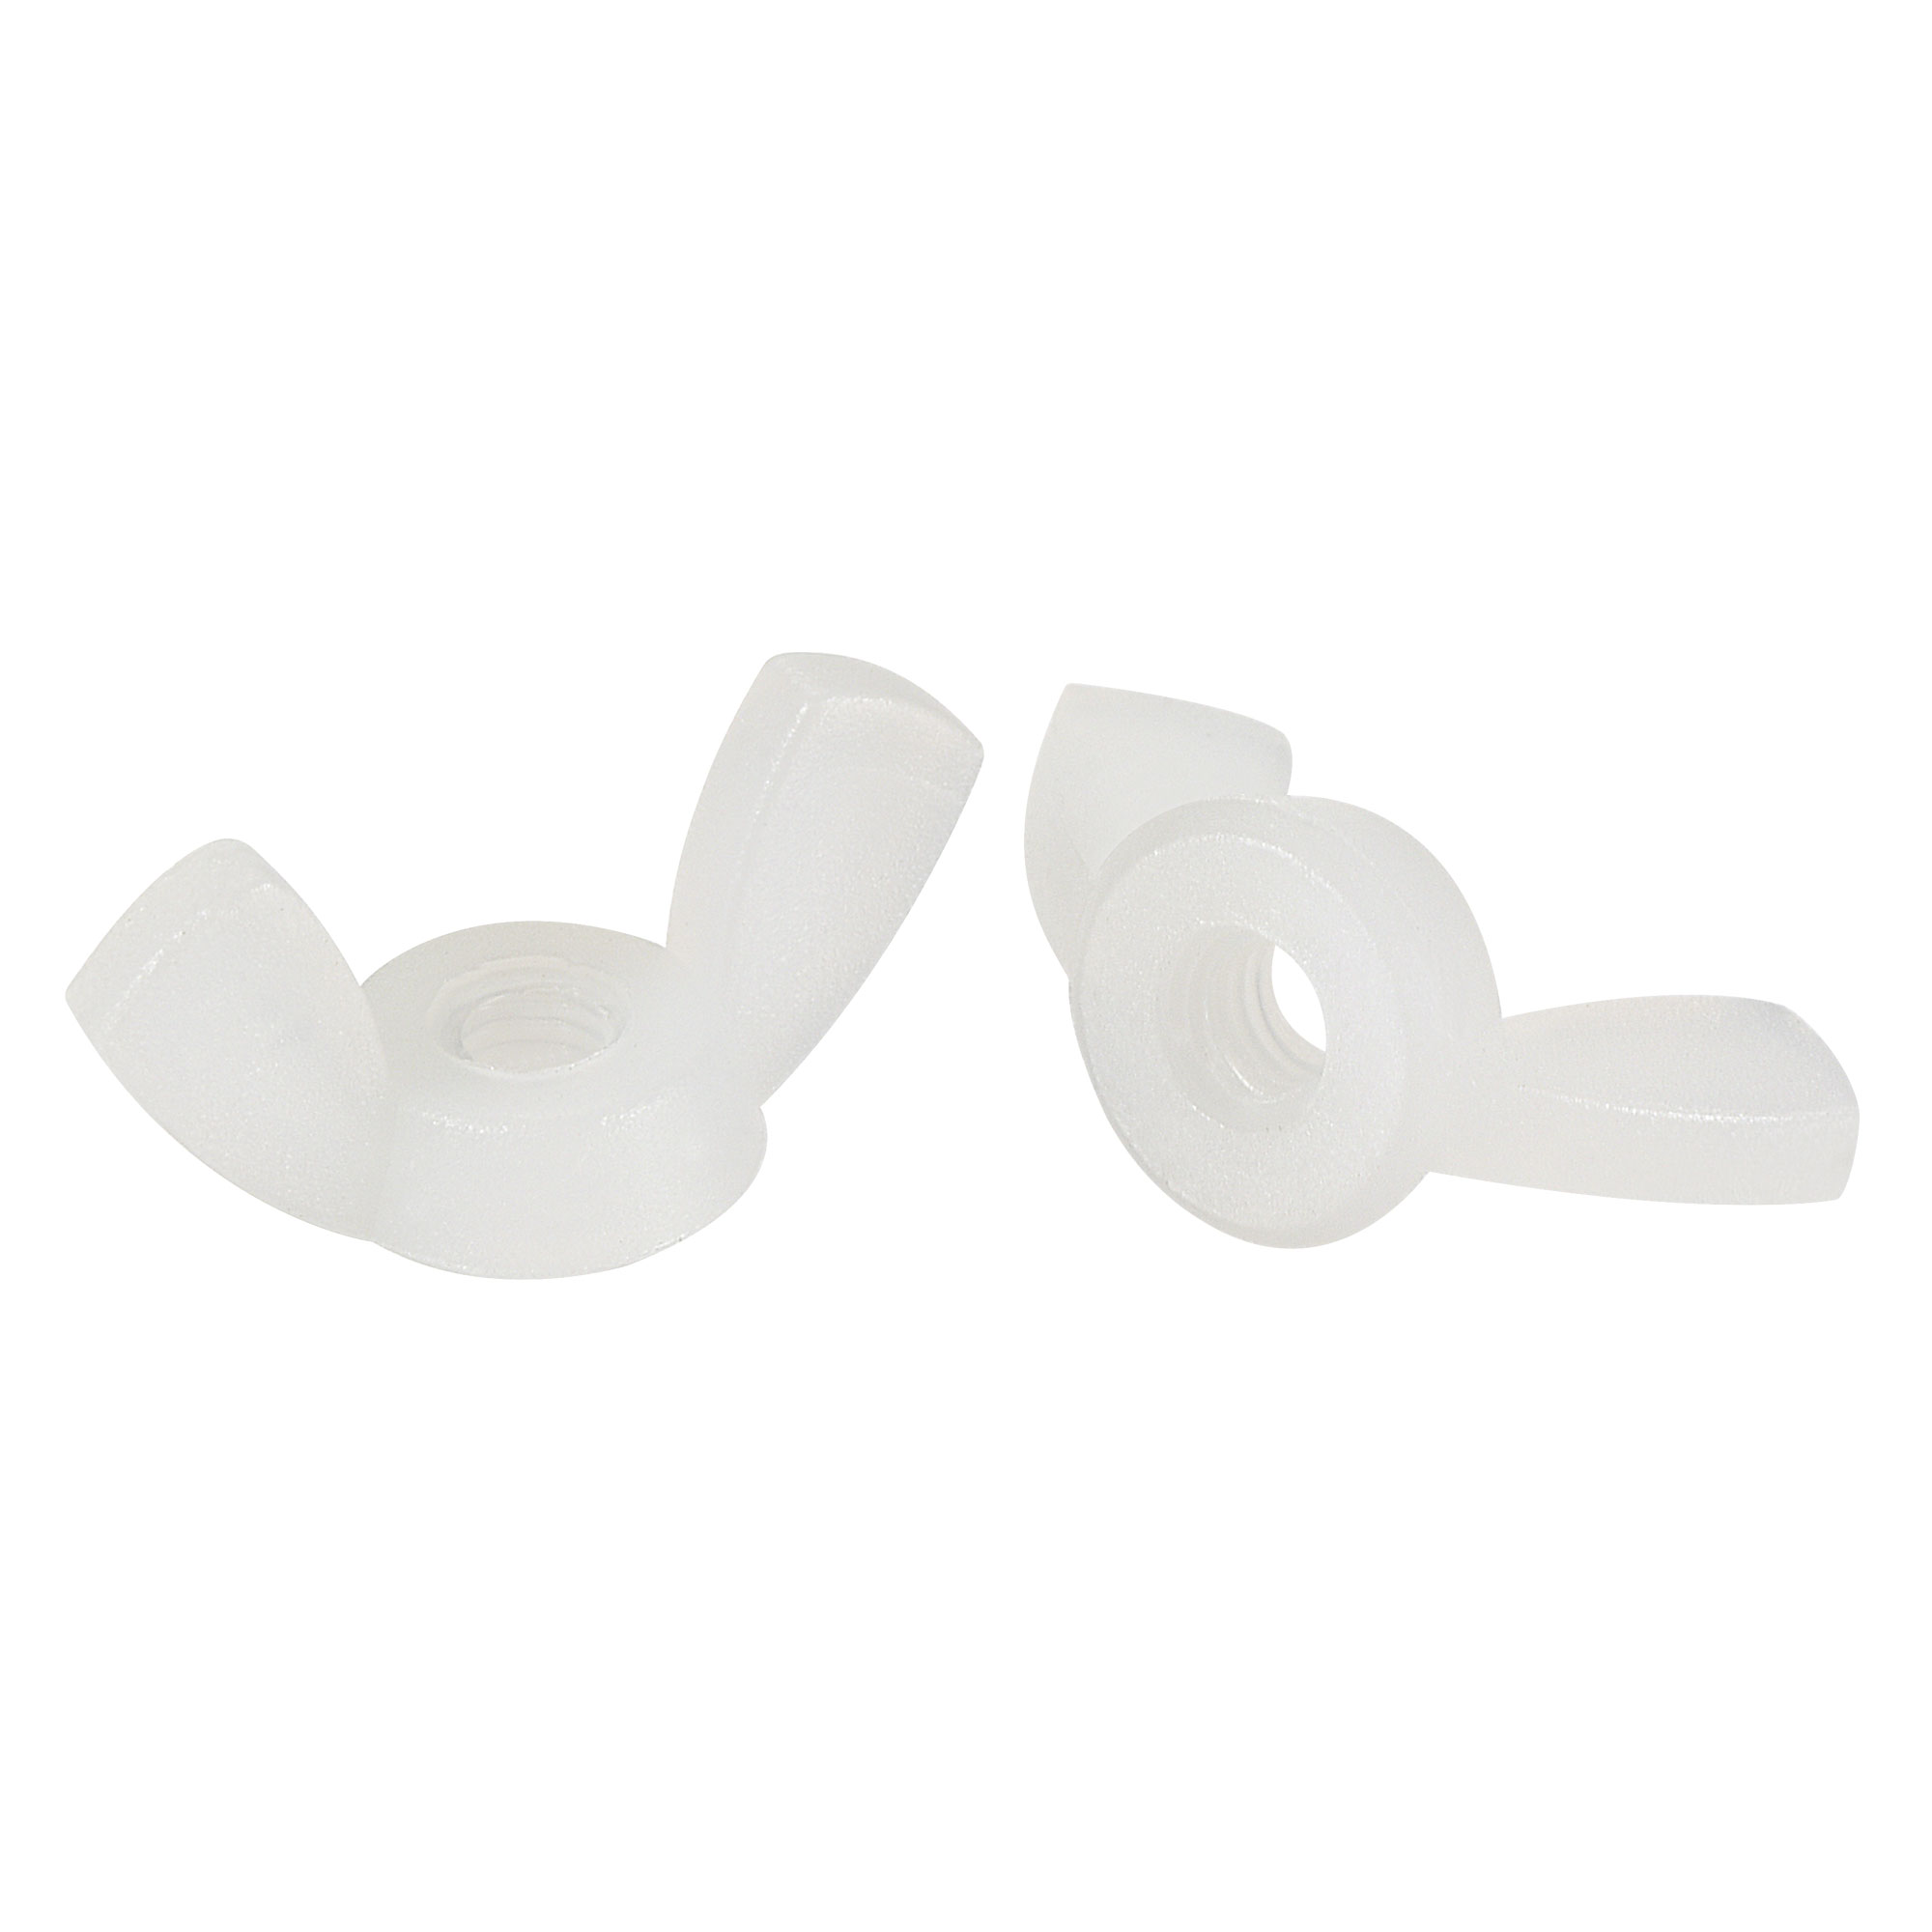 Uxcell M3 Wing Nuts Butterfly Nut Nylon  Hand Twist Tighten Fasteners White 25 Pack - image 1 of 5